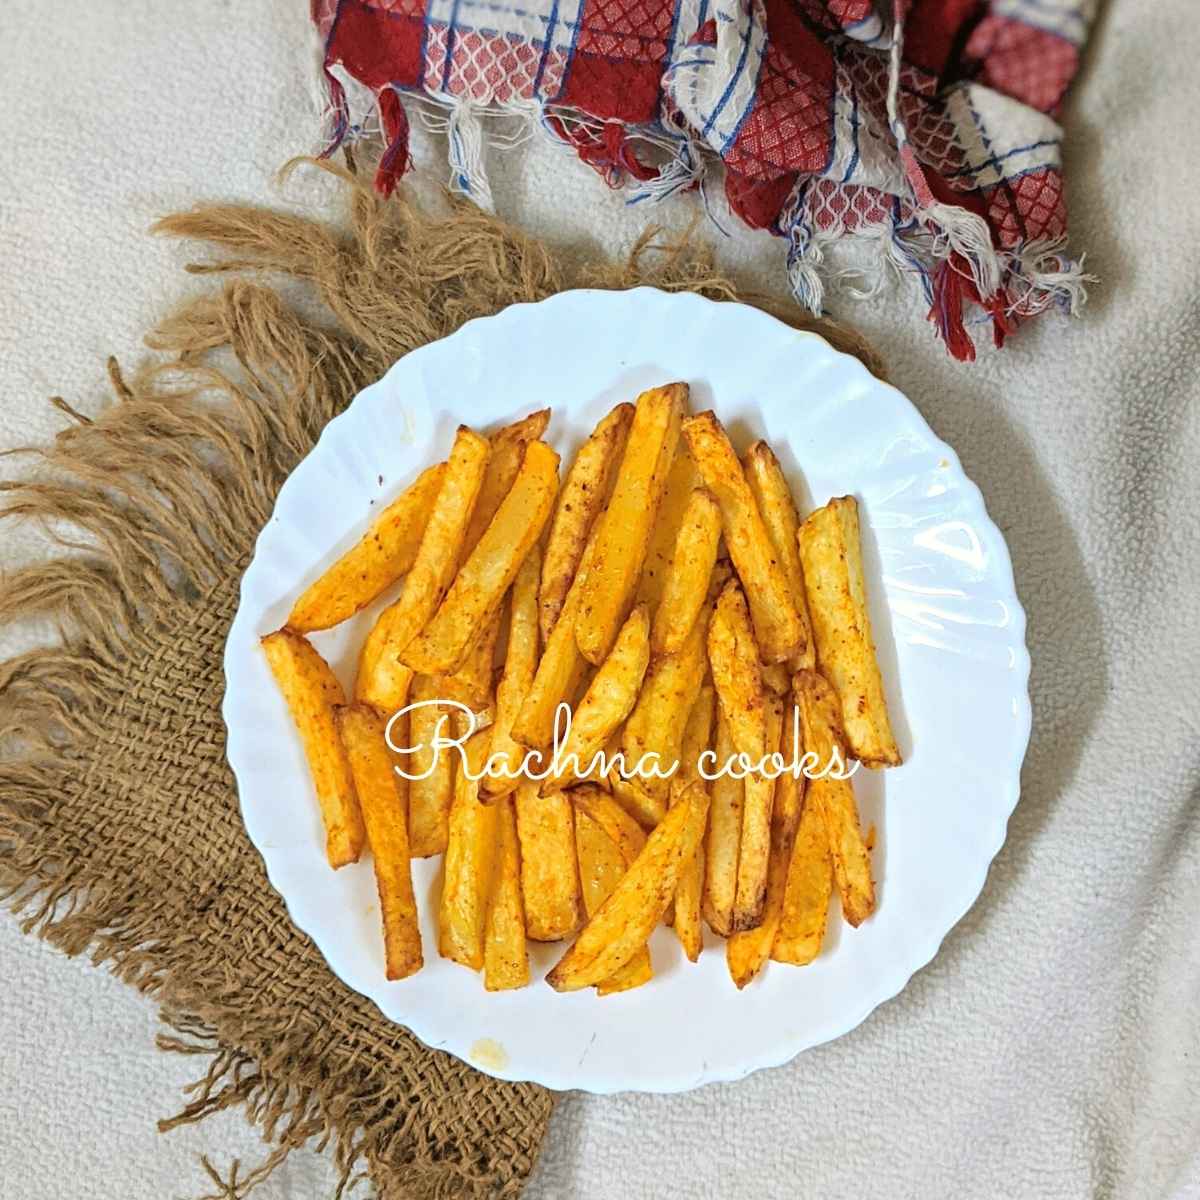 air fried french fries served on a white plate.